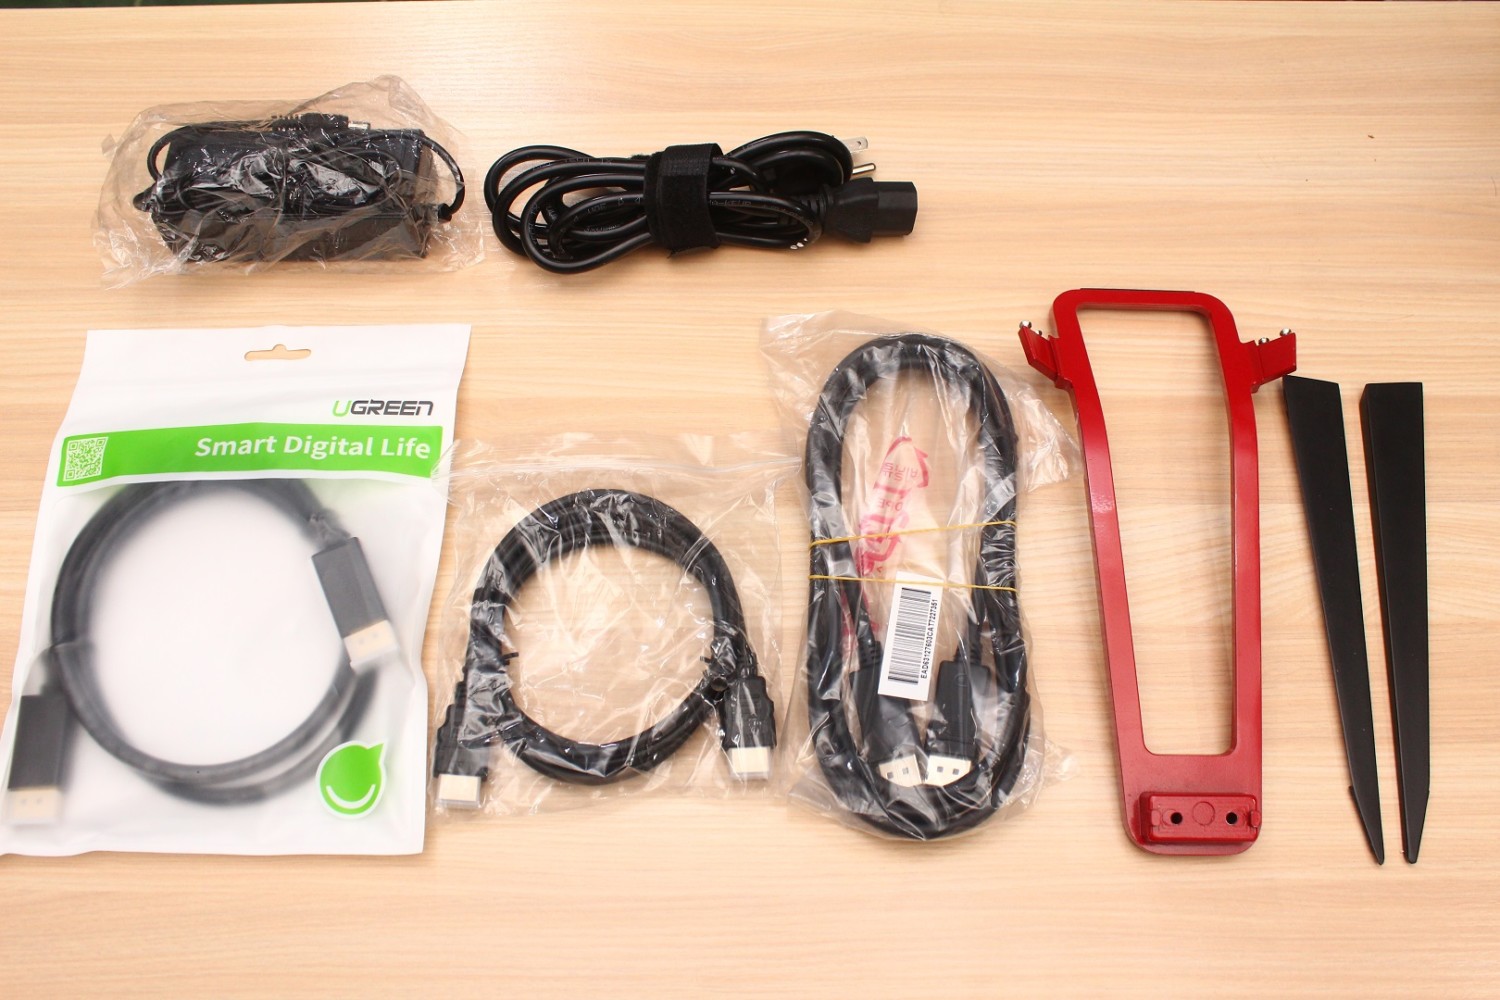 BEZEL 27MD845 unboxing accessories included free hdmi dp cabale